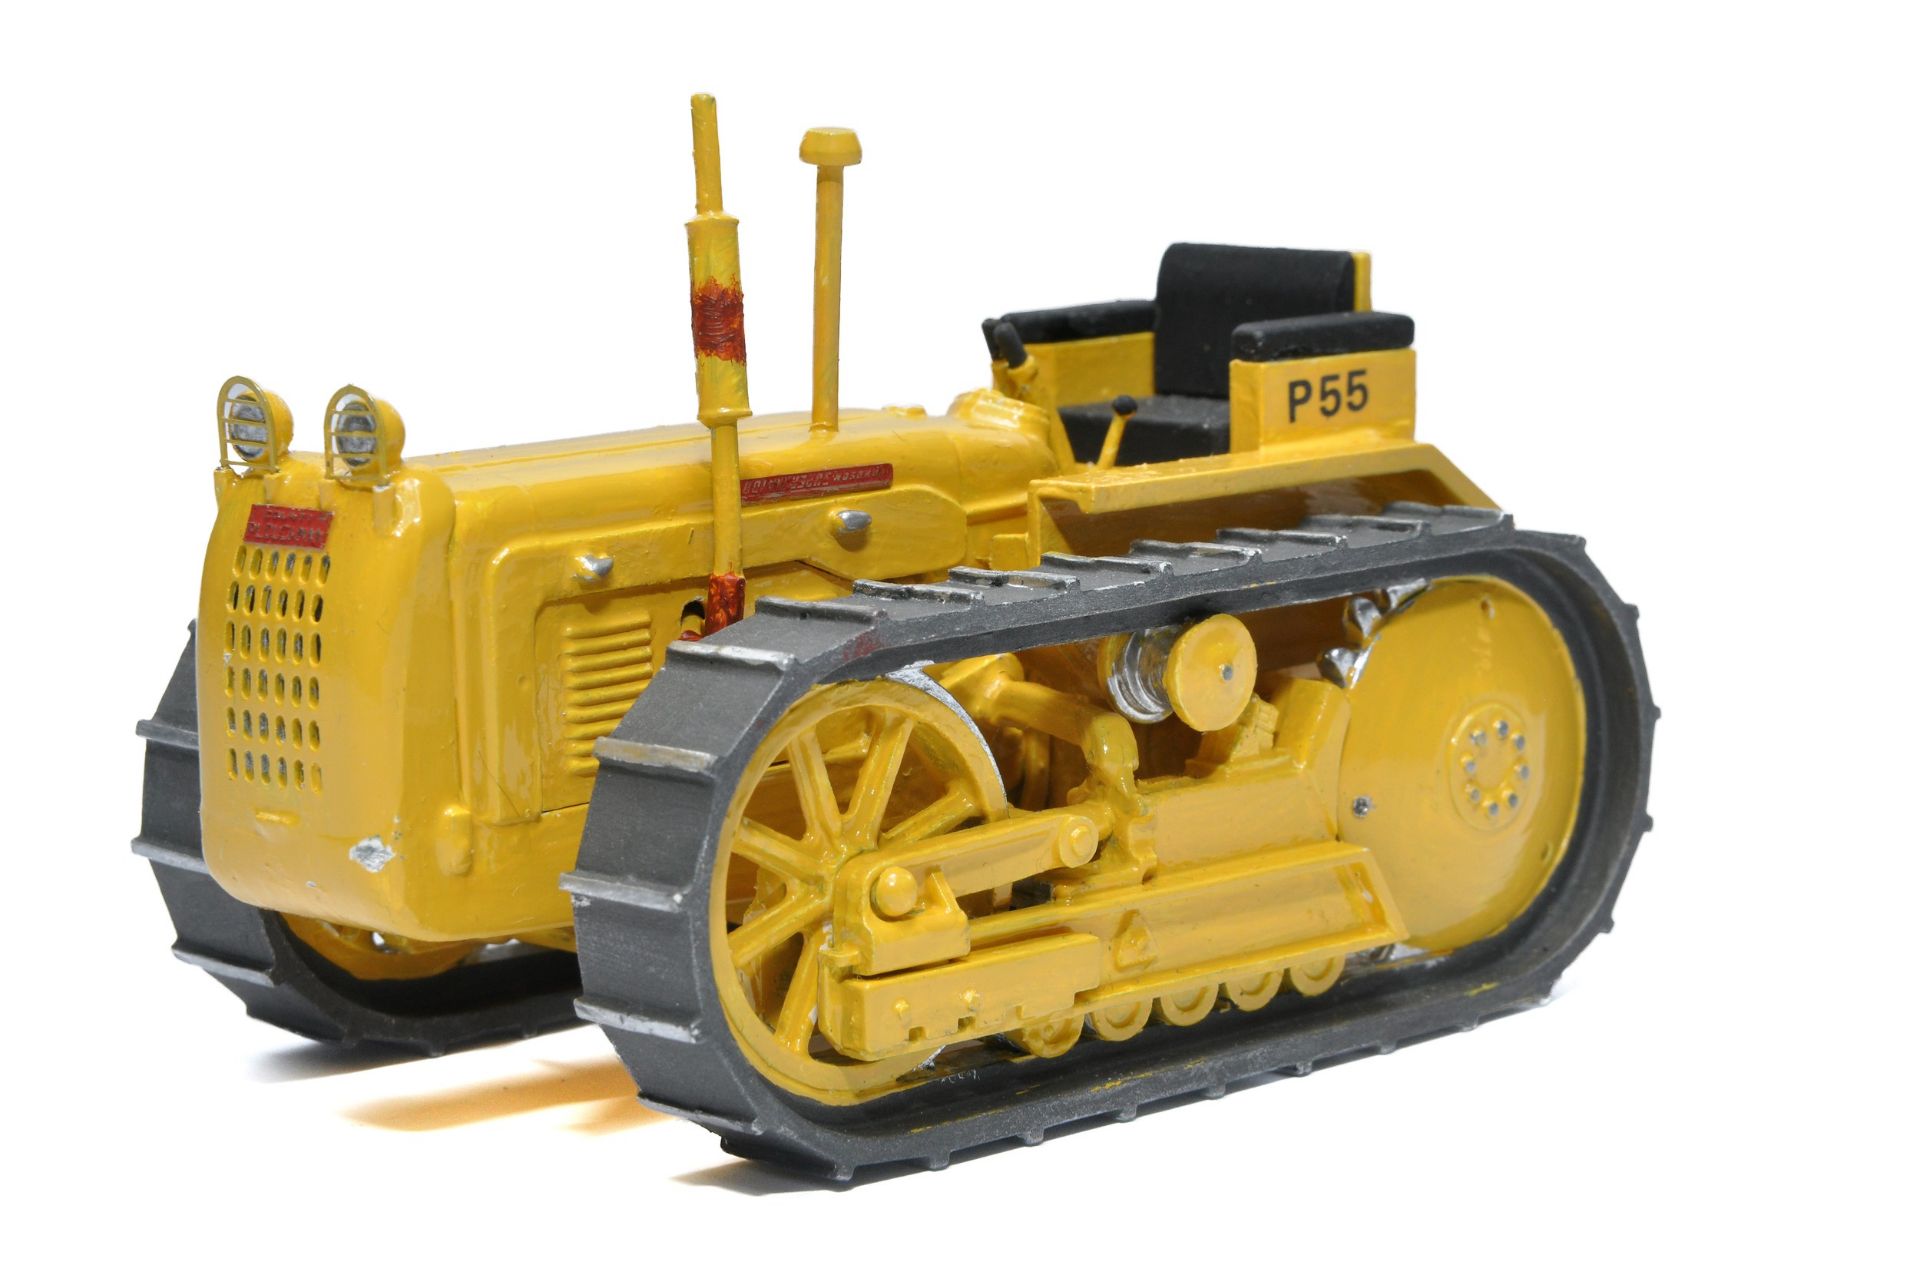 Scaledown Models 1/32 White Metal Farm Model issue comprising County P55 Crawler Tractor.